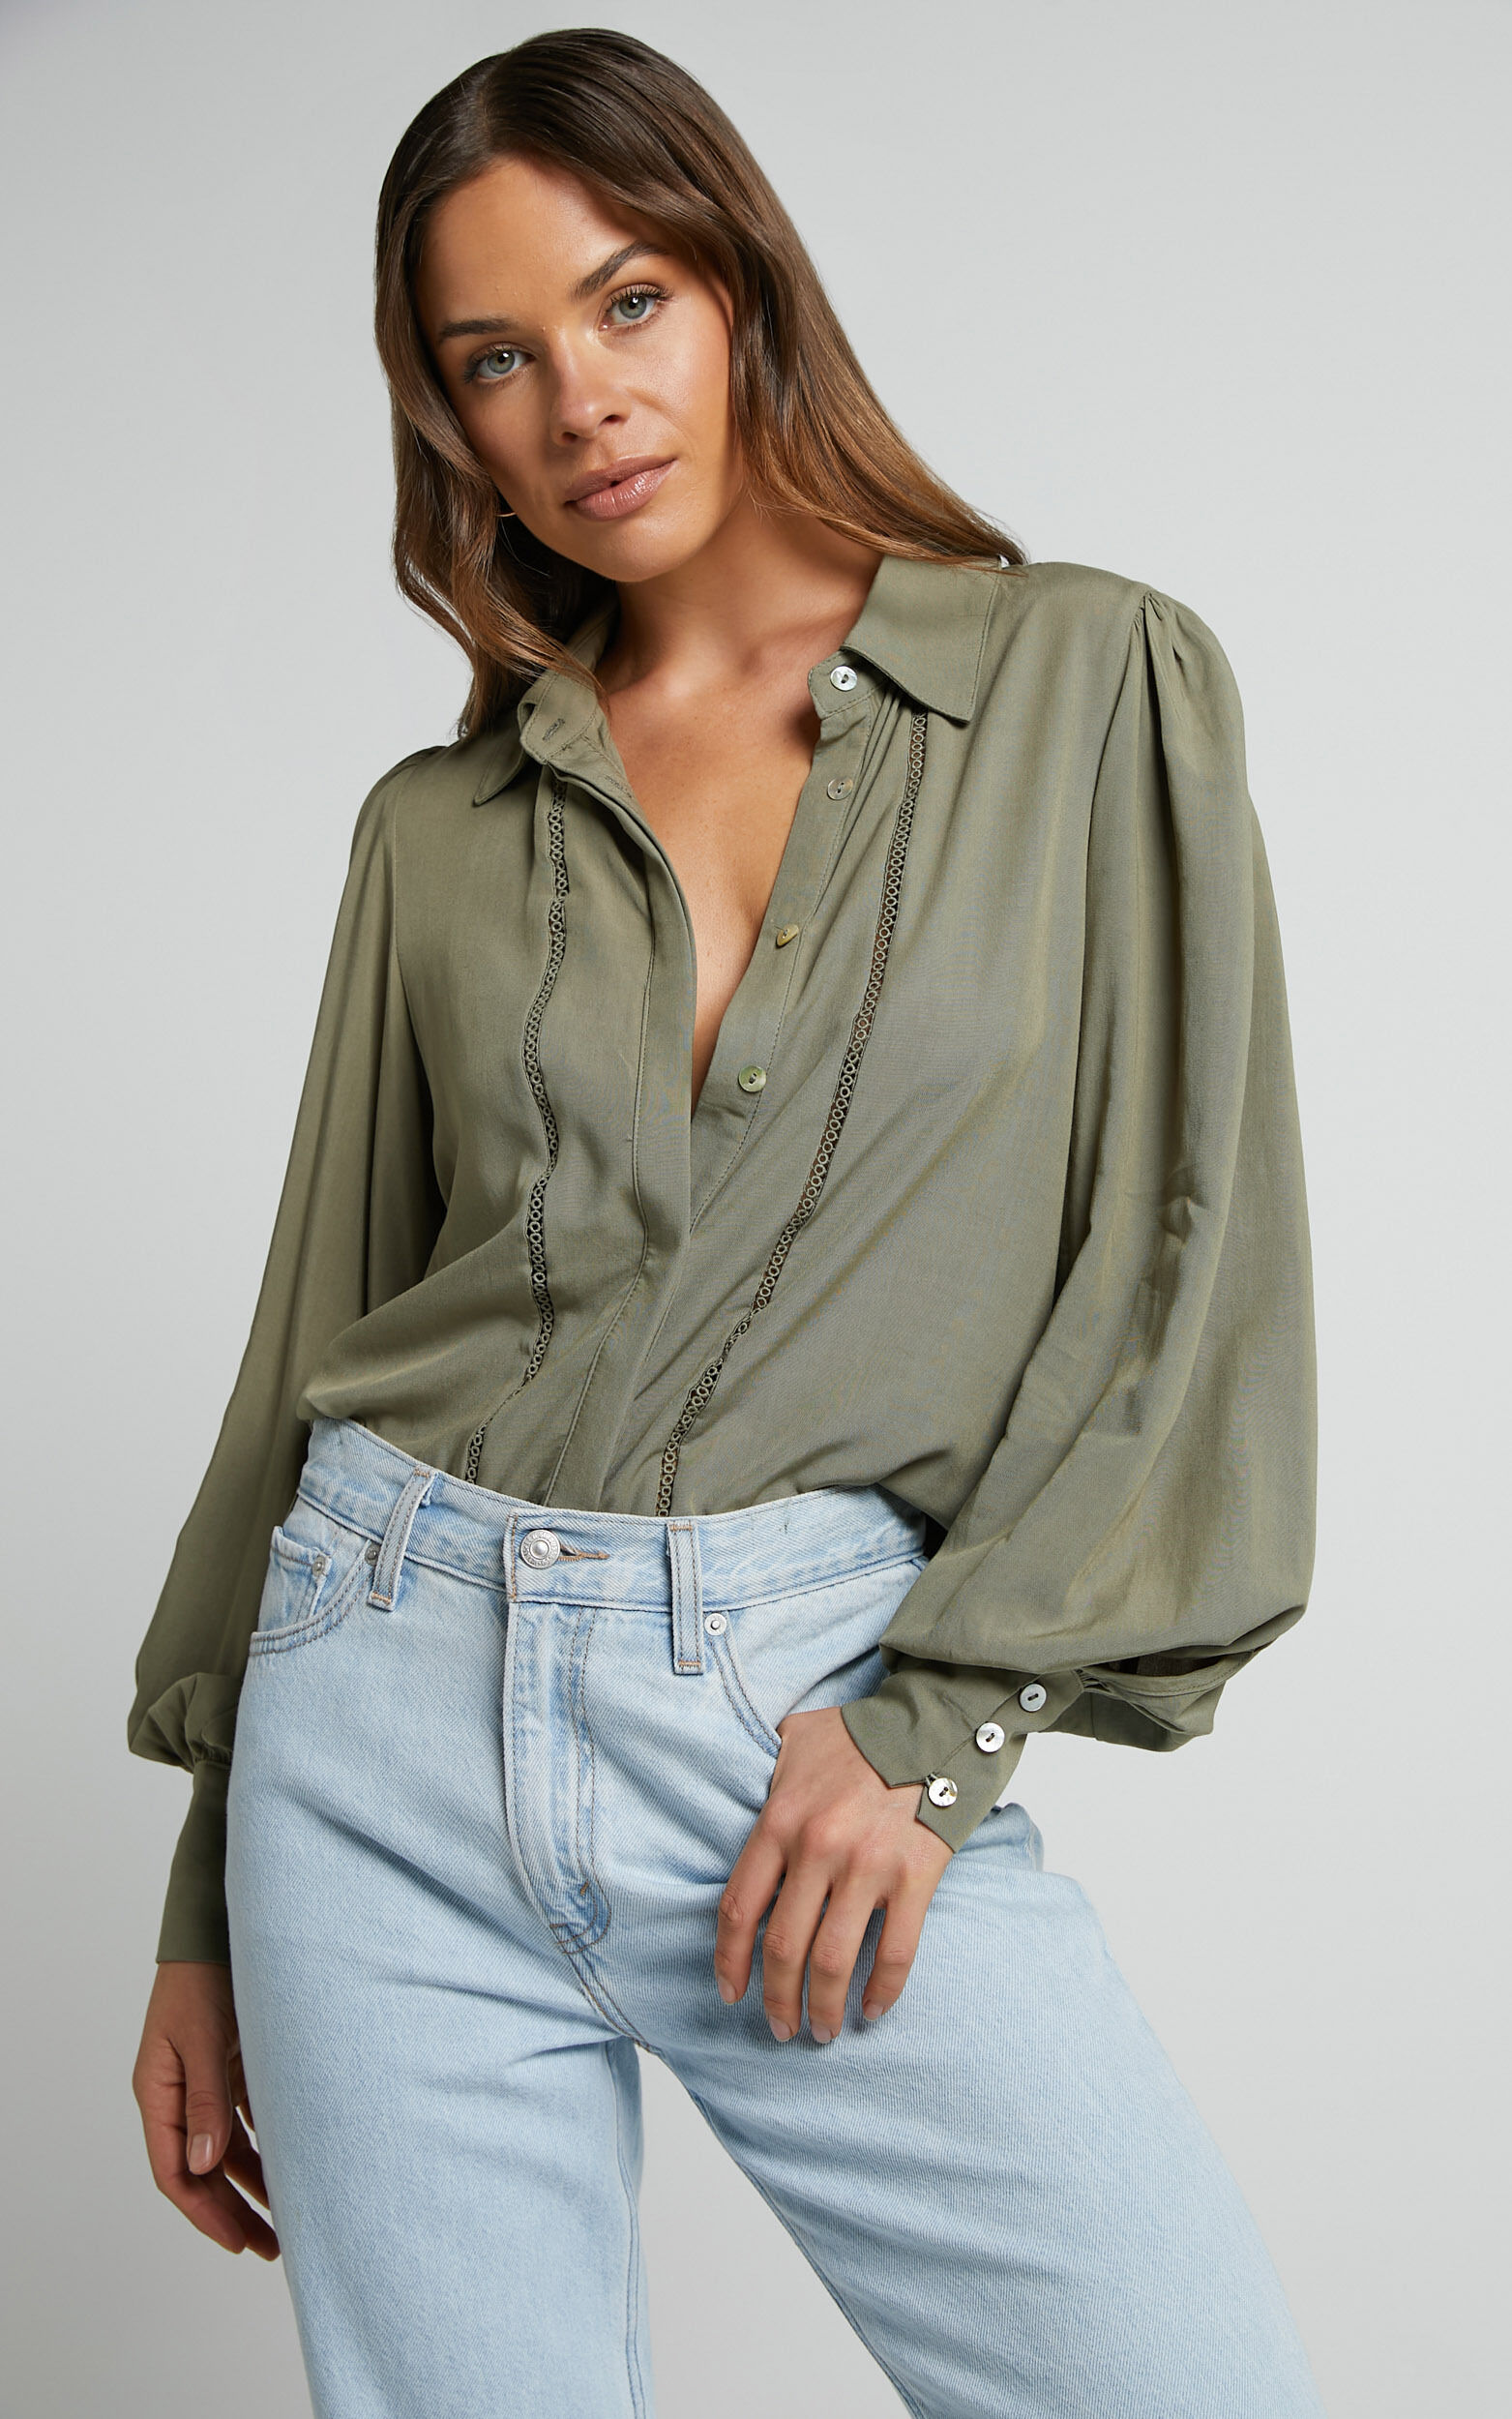 Alaric Blouse - Button Through Long Sleeve Blouse in Olive - 06, GRN1